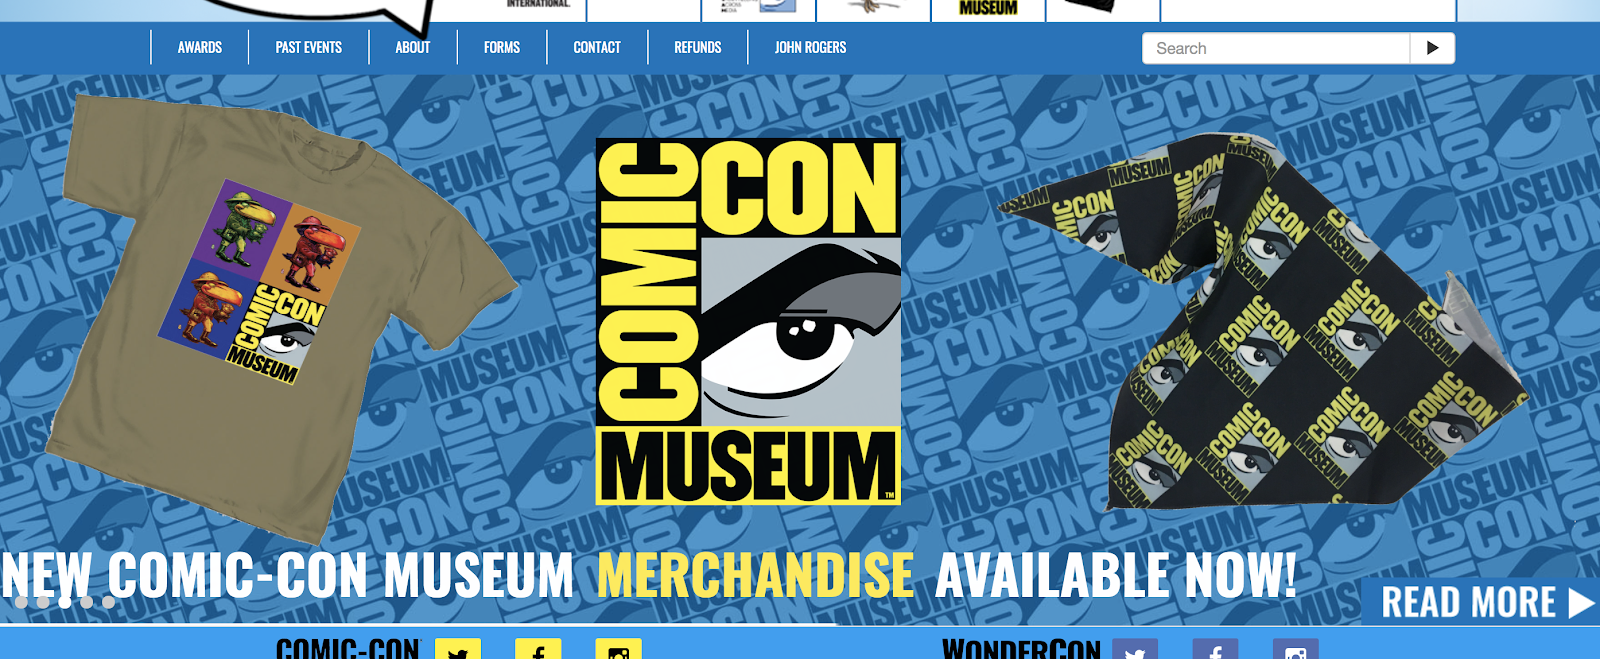 Comic Con Screenshot (Events to Meet Your Blog Readers At)